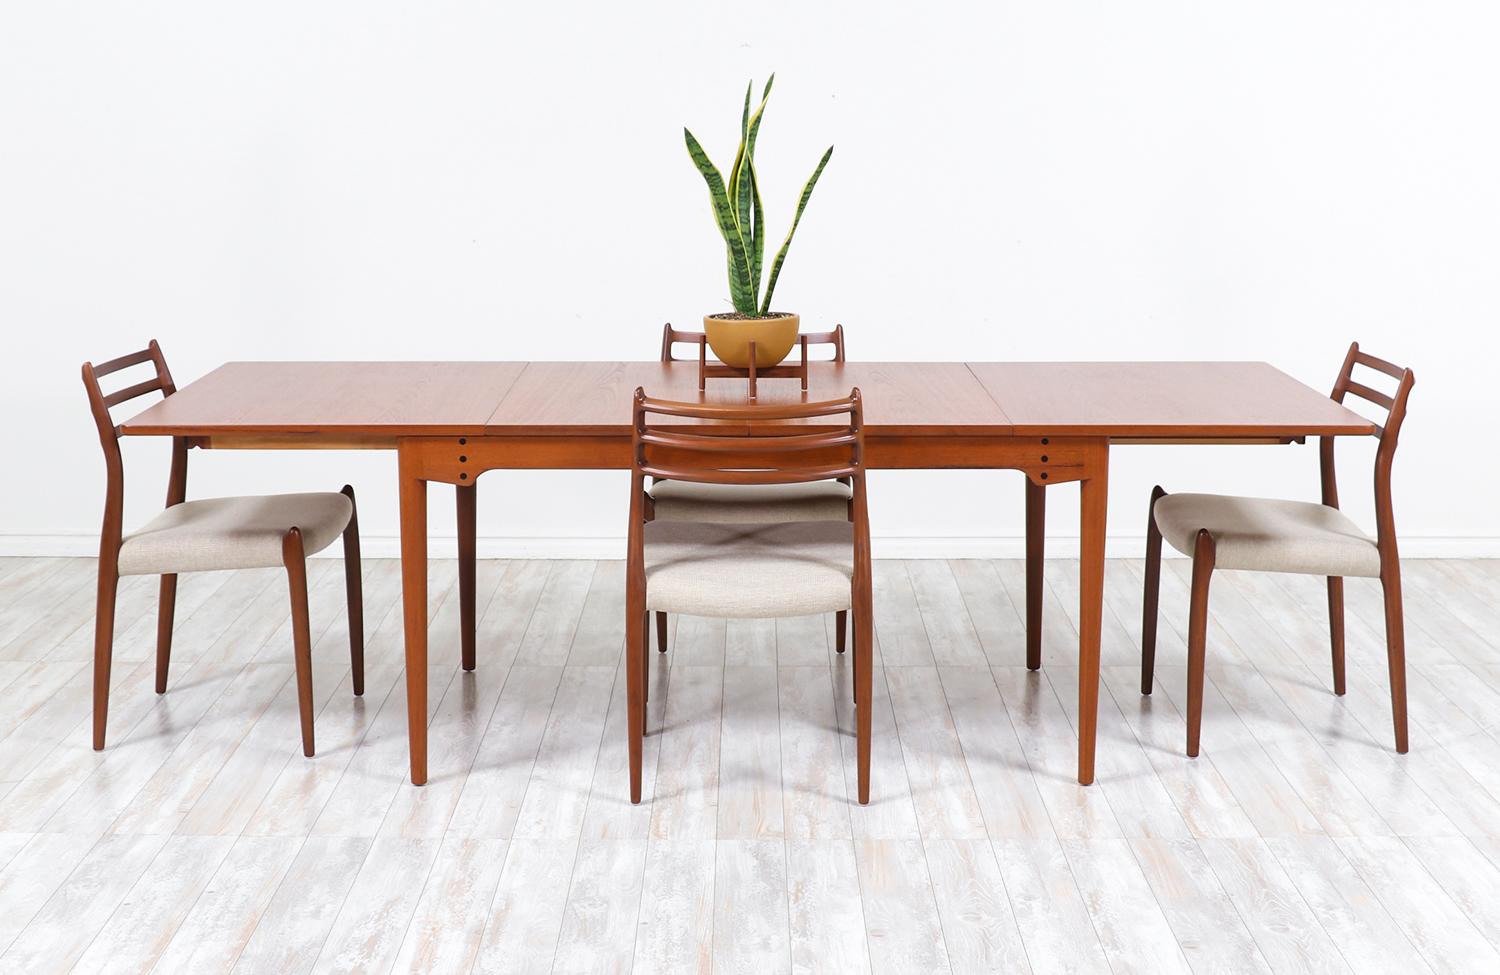 Spectacular Model-BO65 dining table designed by architect Finn Juhl in collaboration with the workshop of Bovirke in Denmark during the 1960s. This unique design features a rectangular expandable top with two removable leaves allowing more table